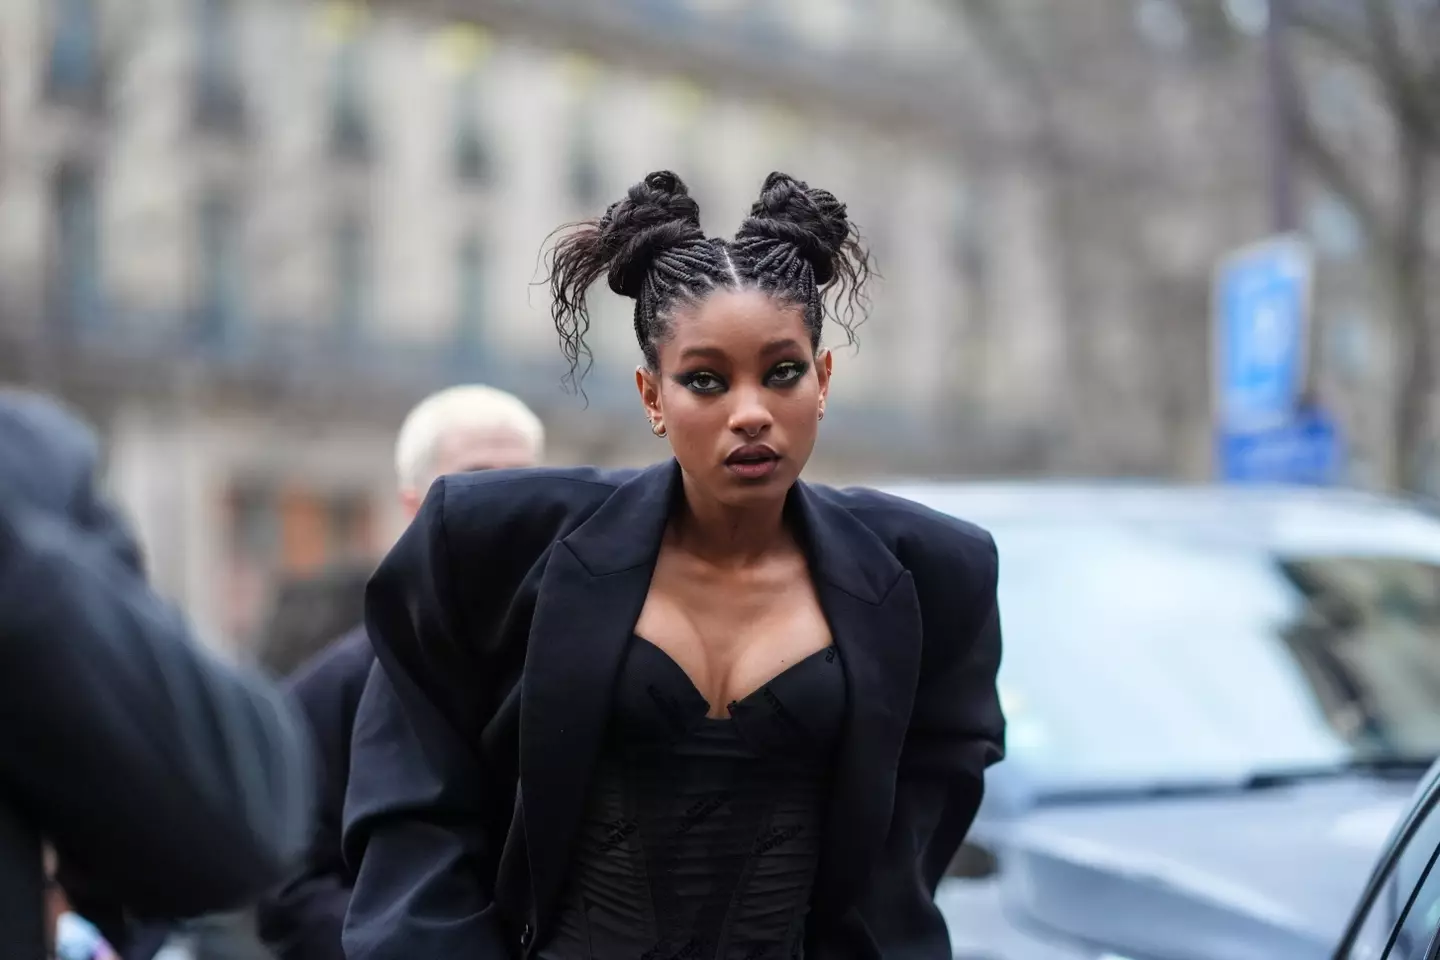 Willow Smith at Paris Fashion Week this year (Edward Berthelot/Getty Images)